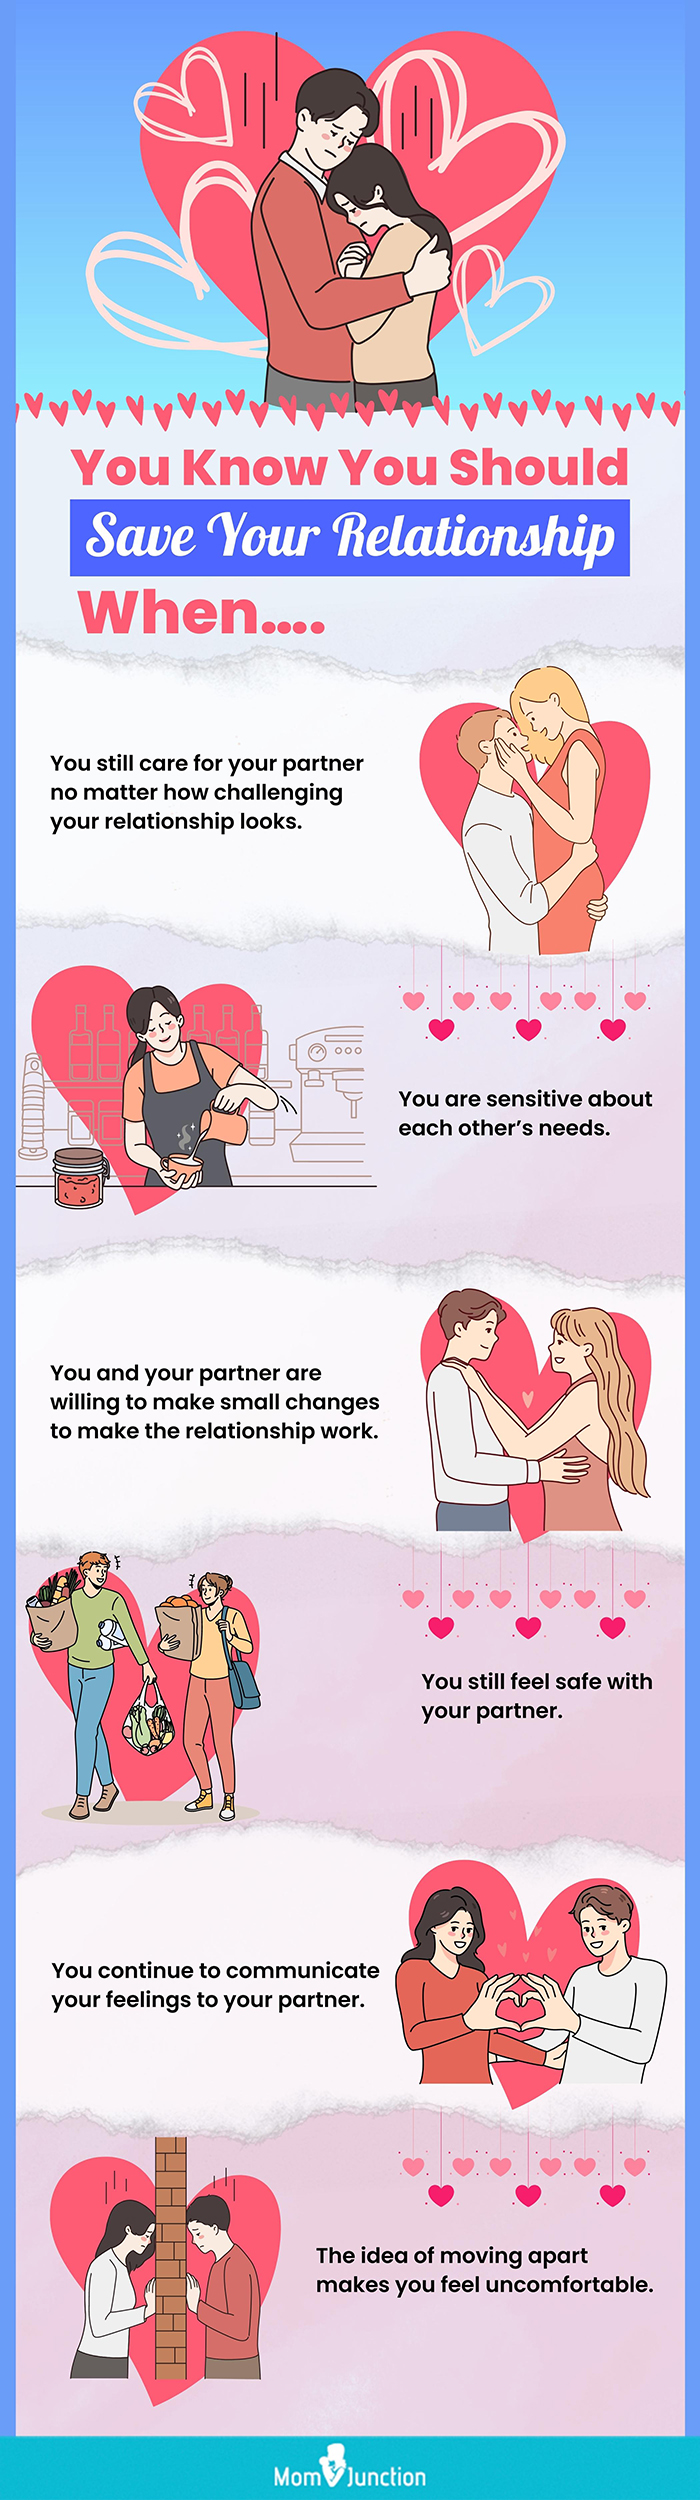 signs your relationship is worth saving [infographic]